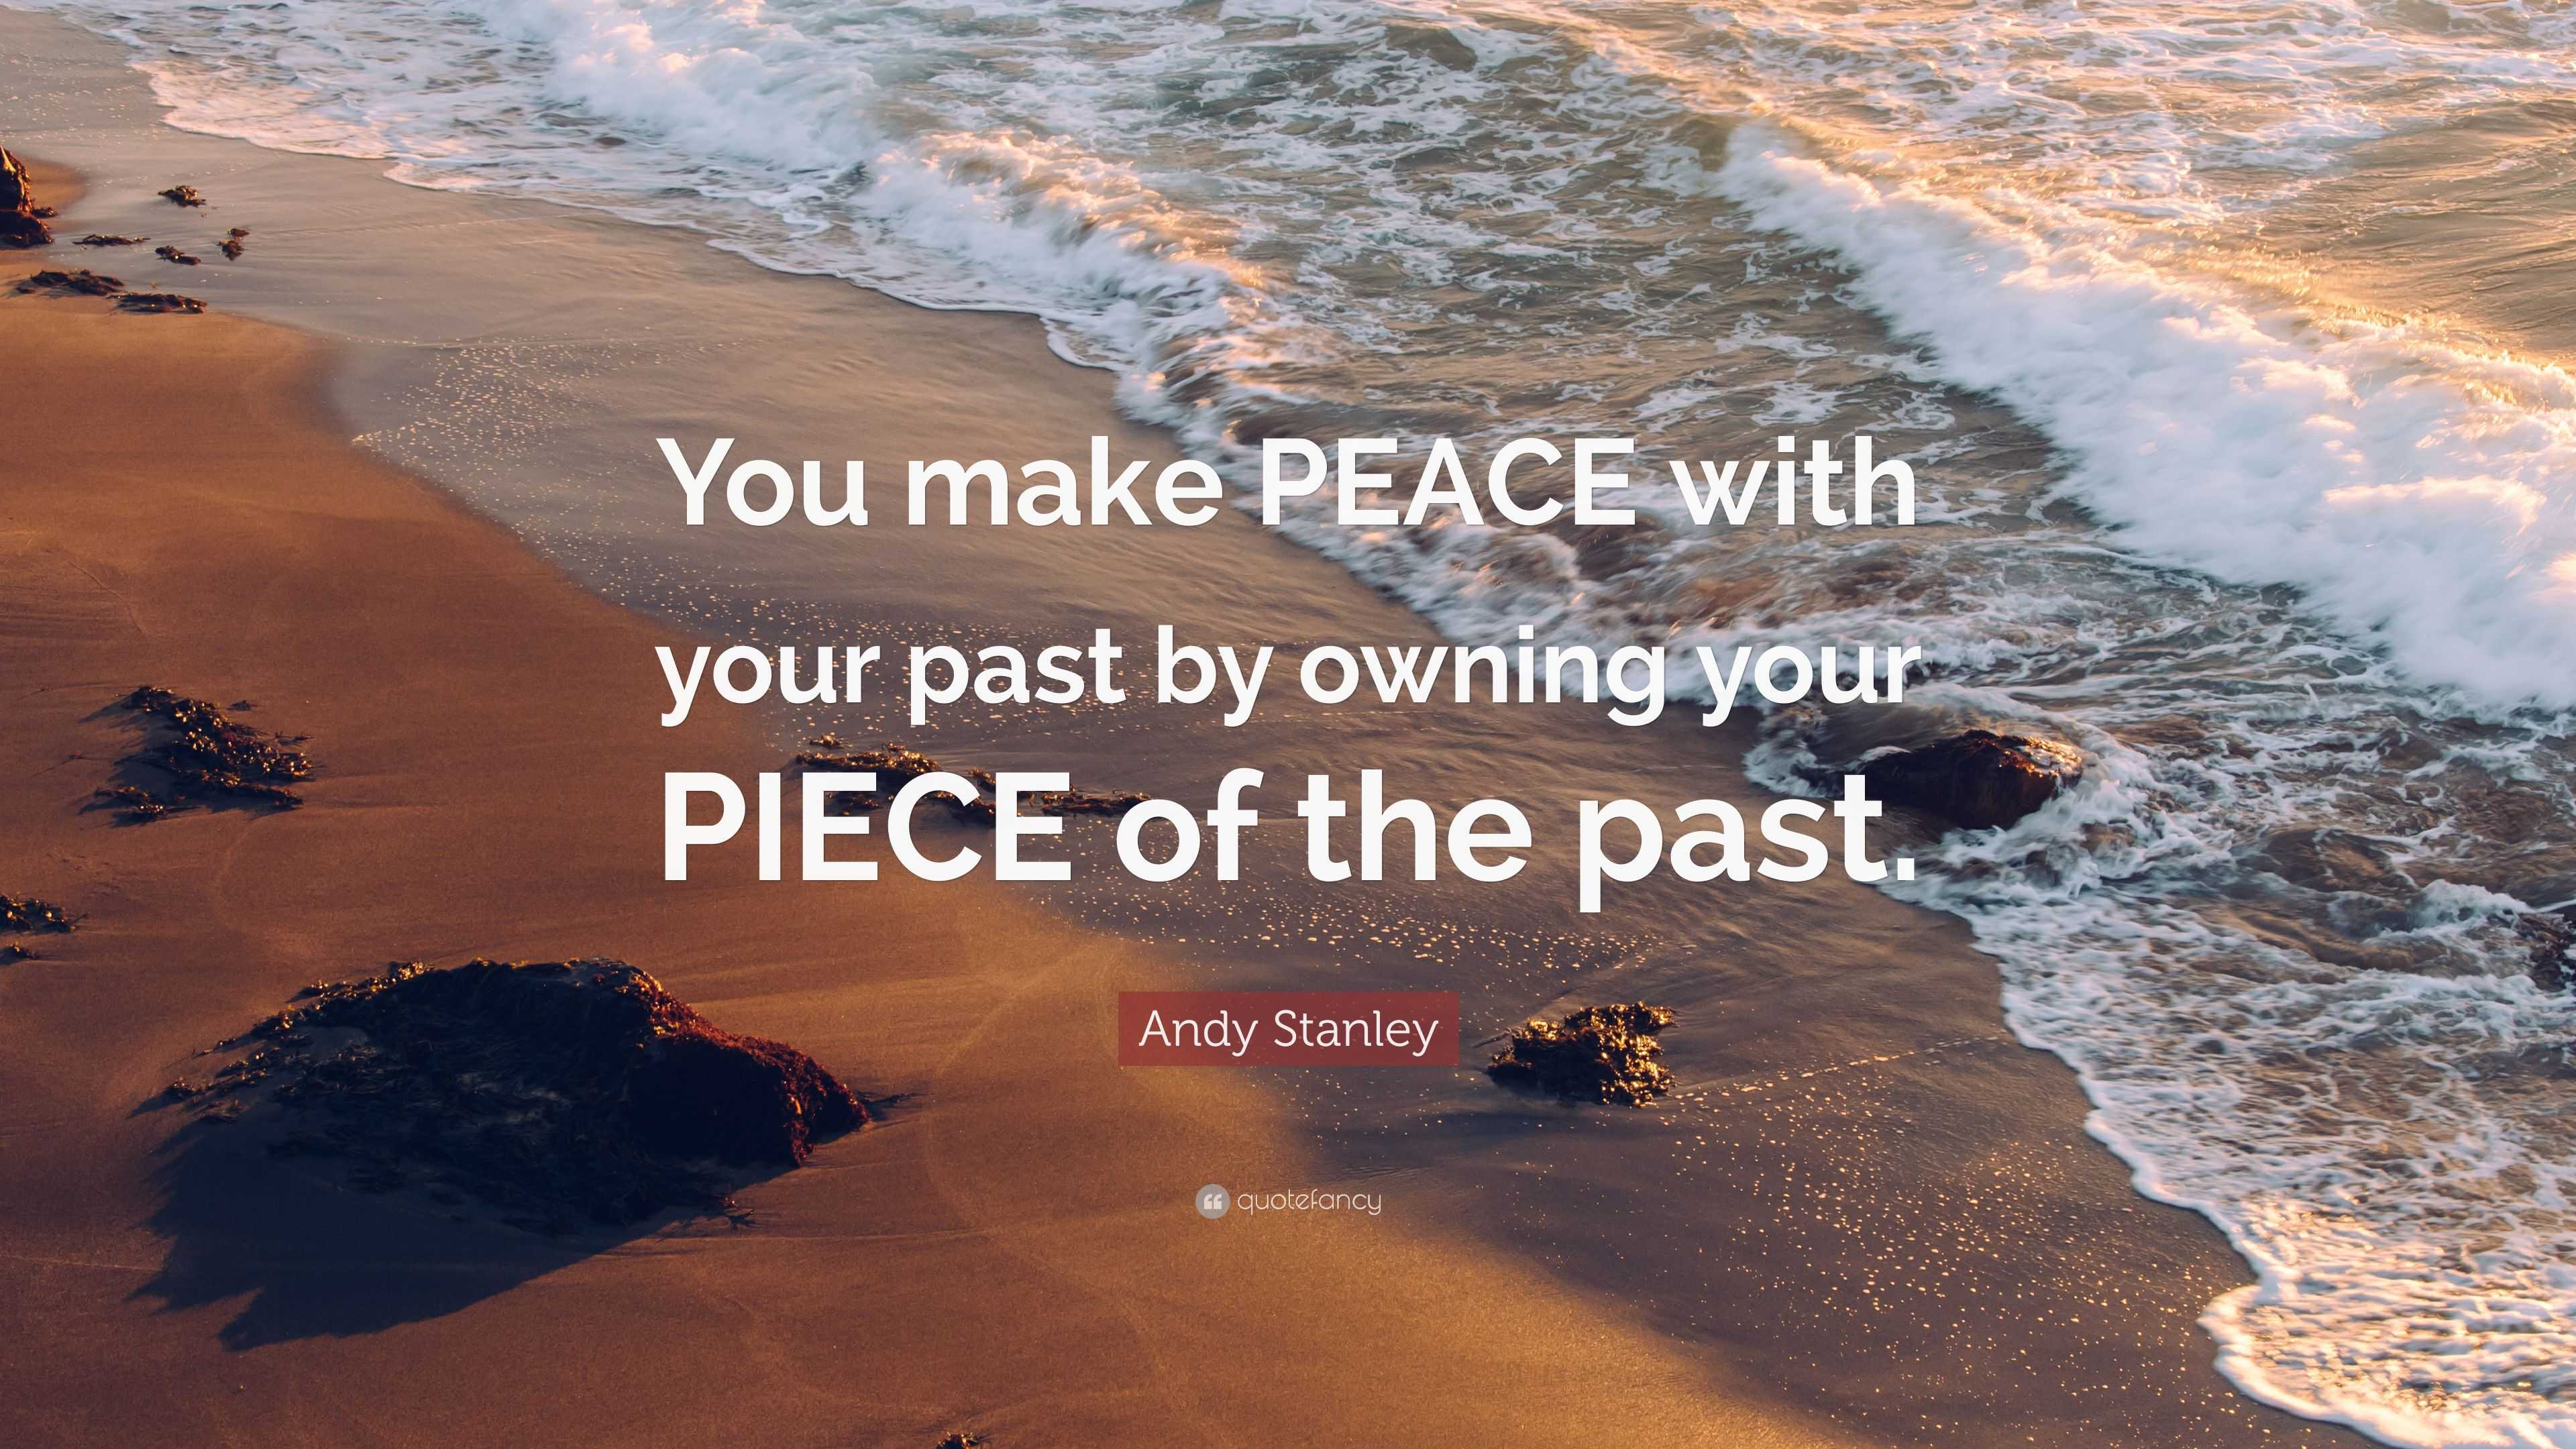 Andy Stanley Quote: “You make PEACE with your past by owning your PIECE